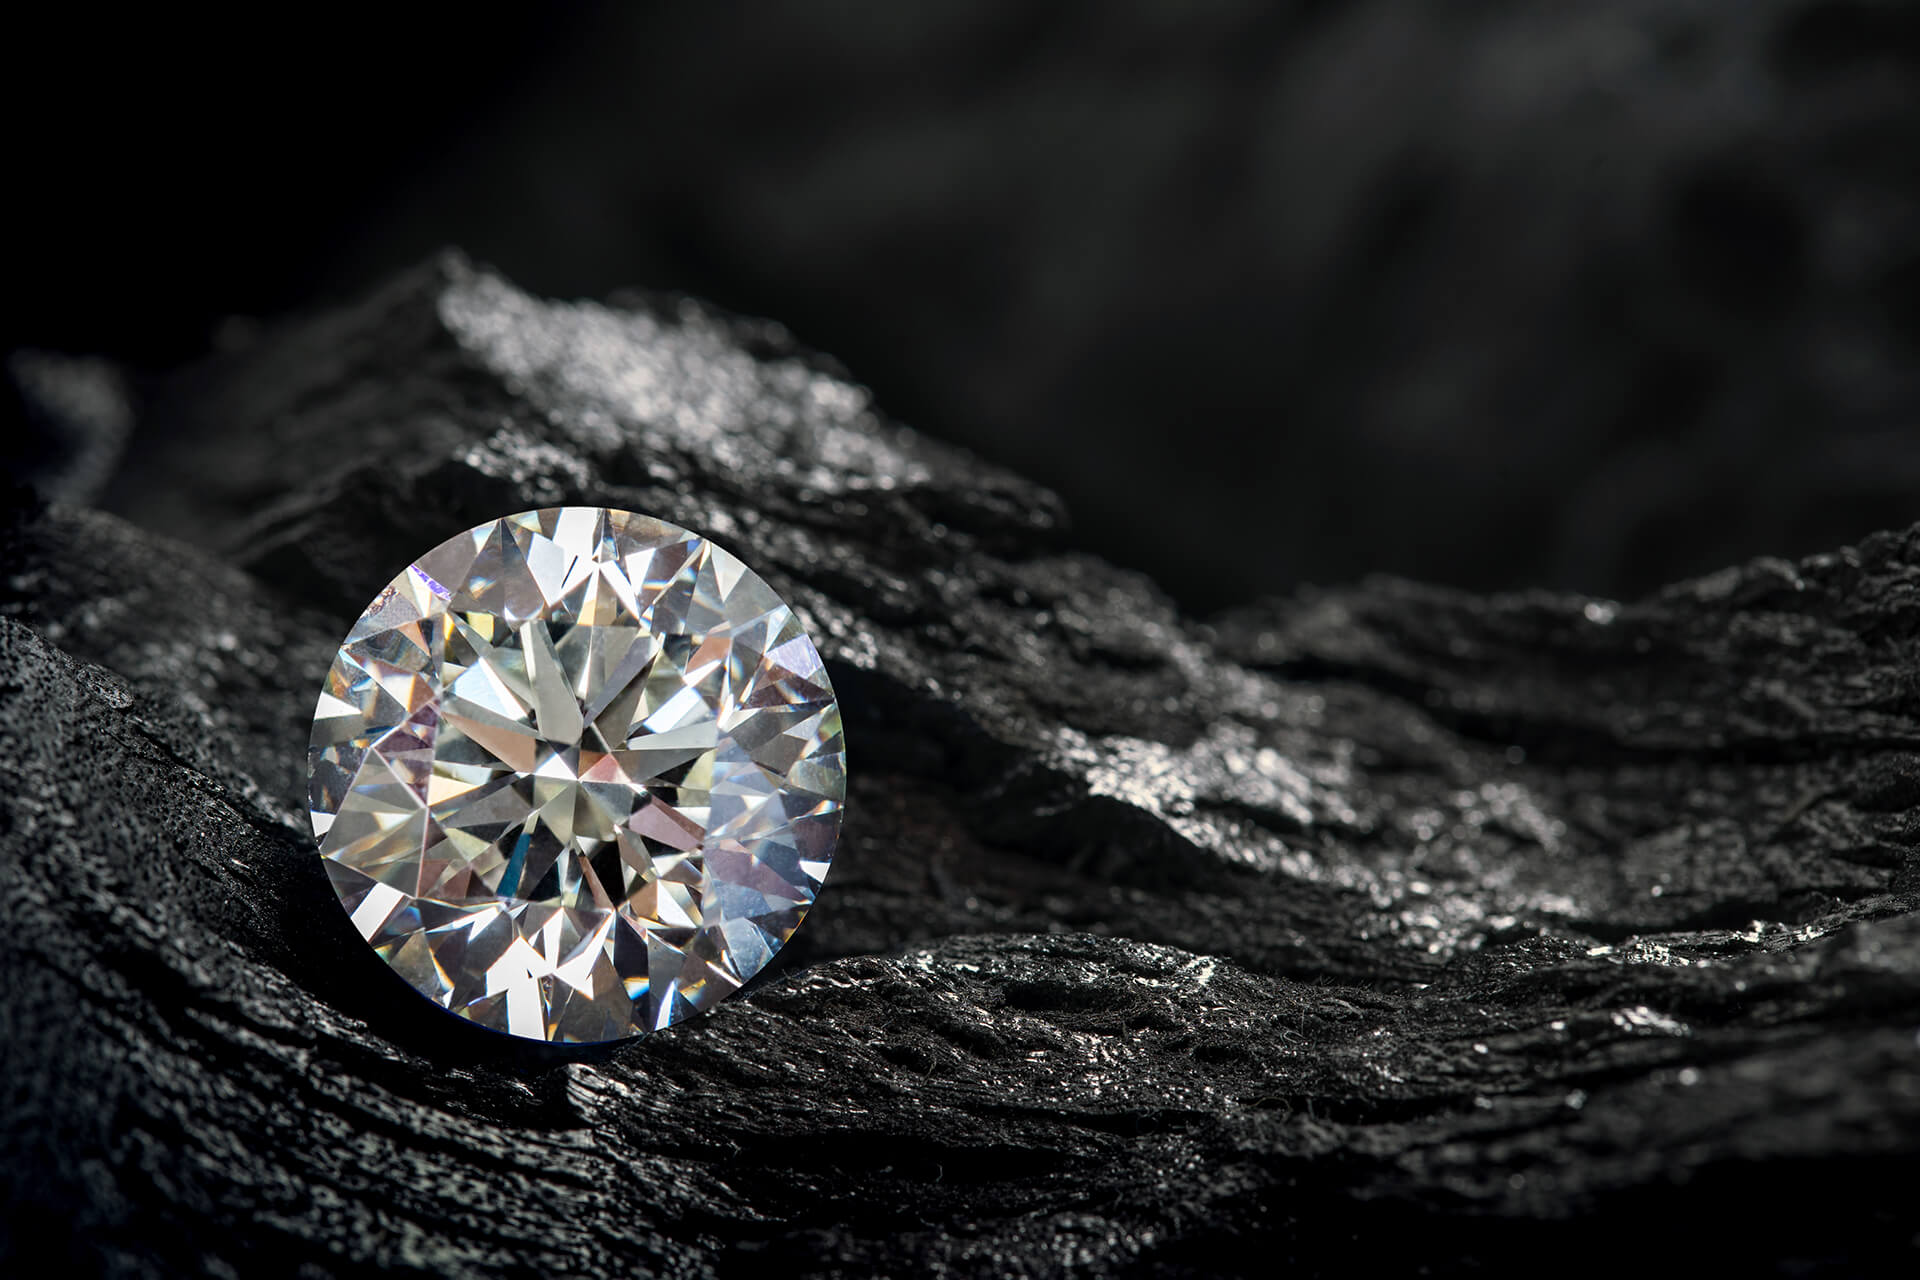 De Beers is offering their online Diamond Foundation Course for free